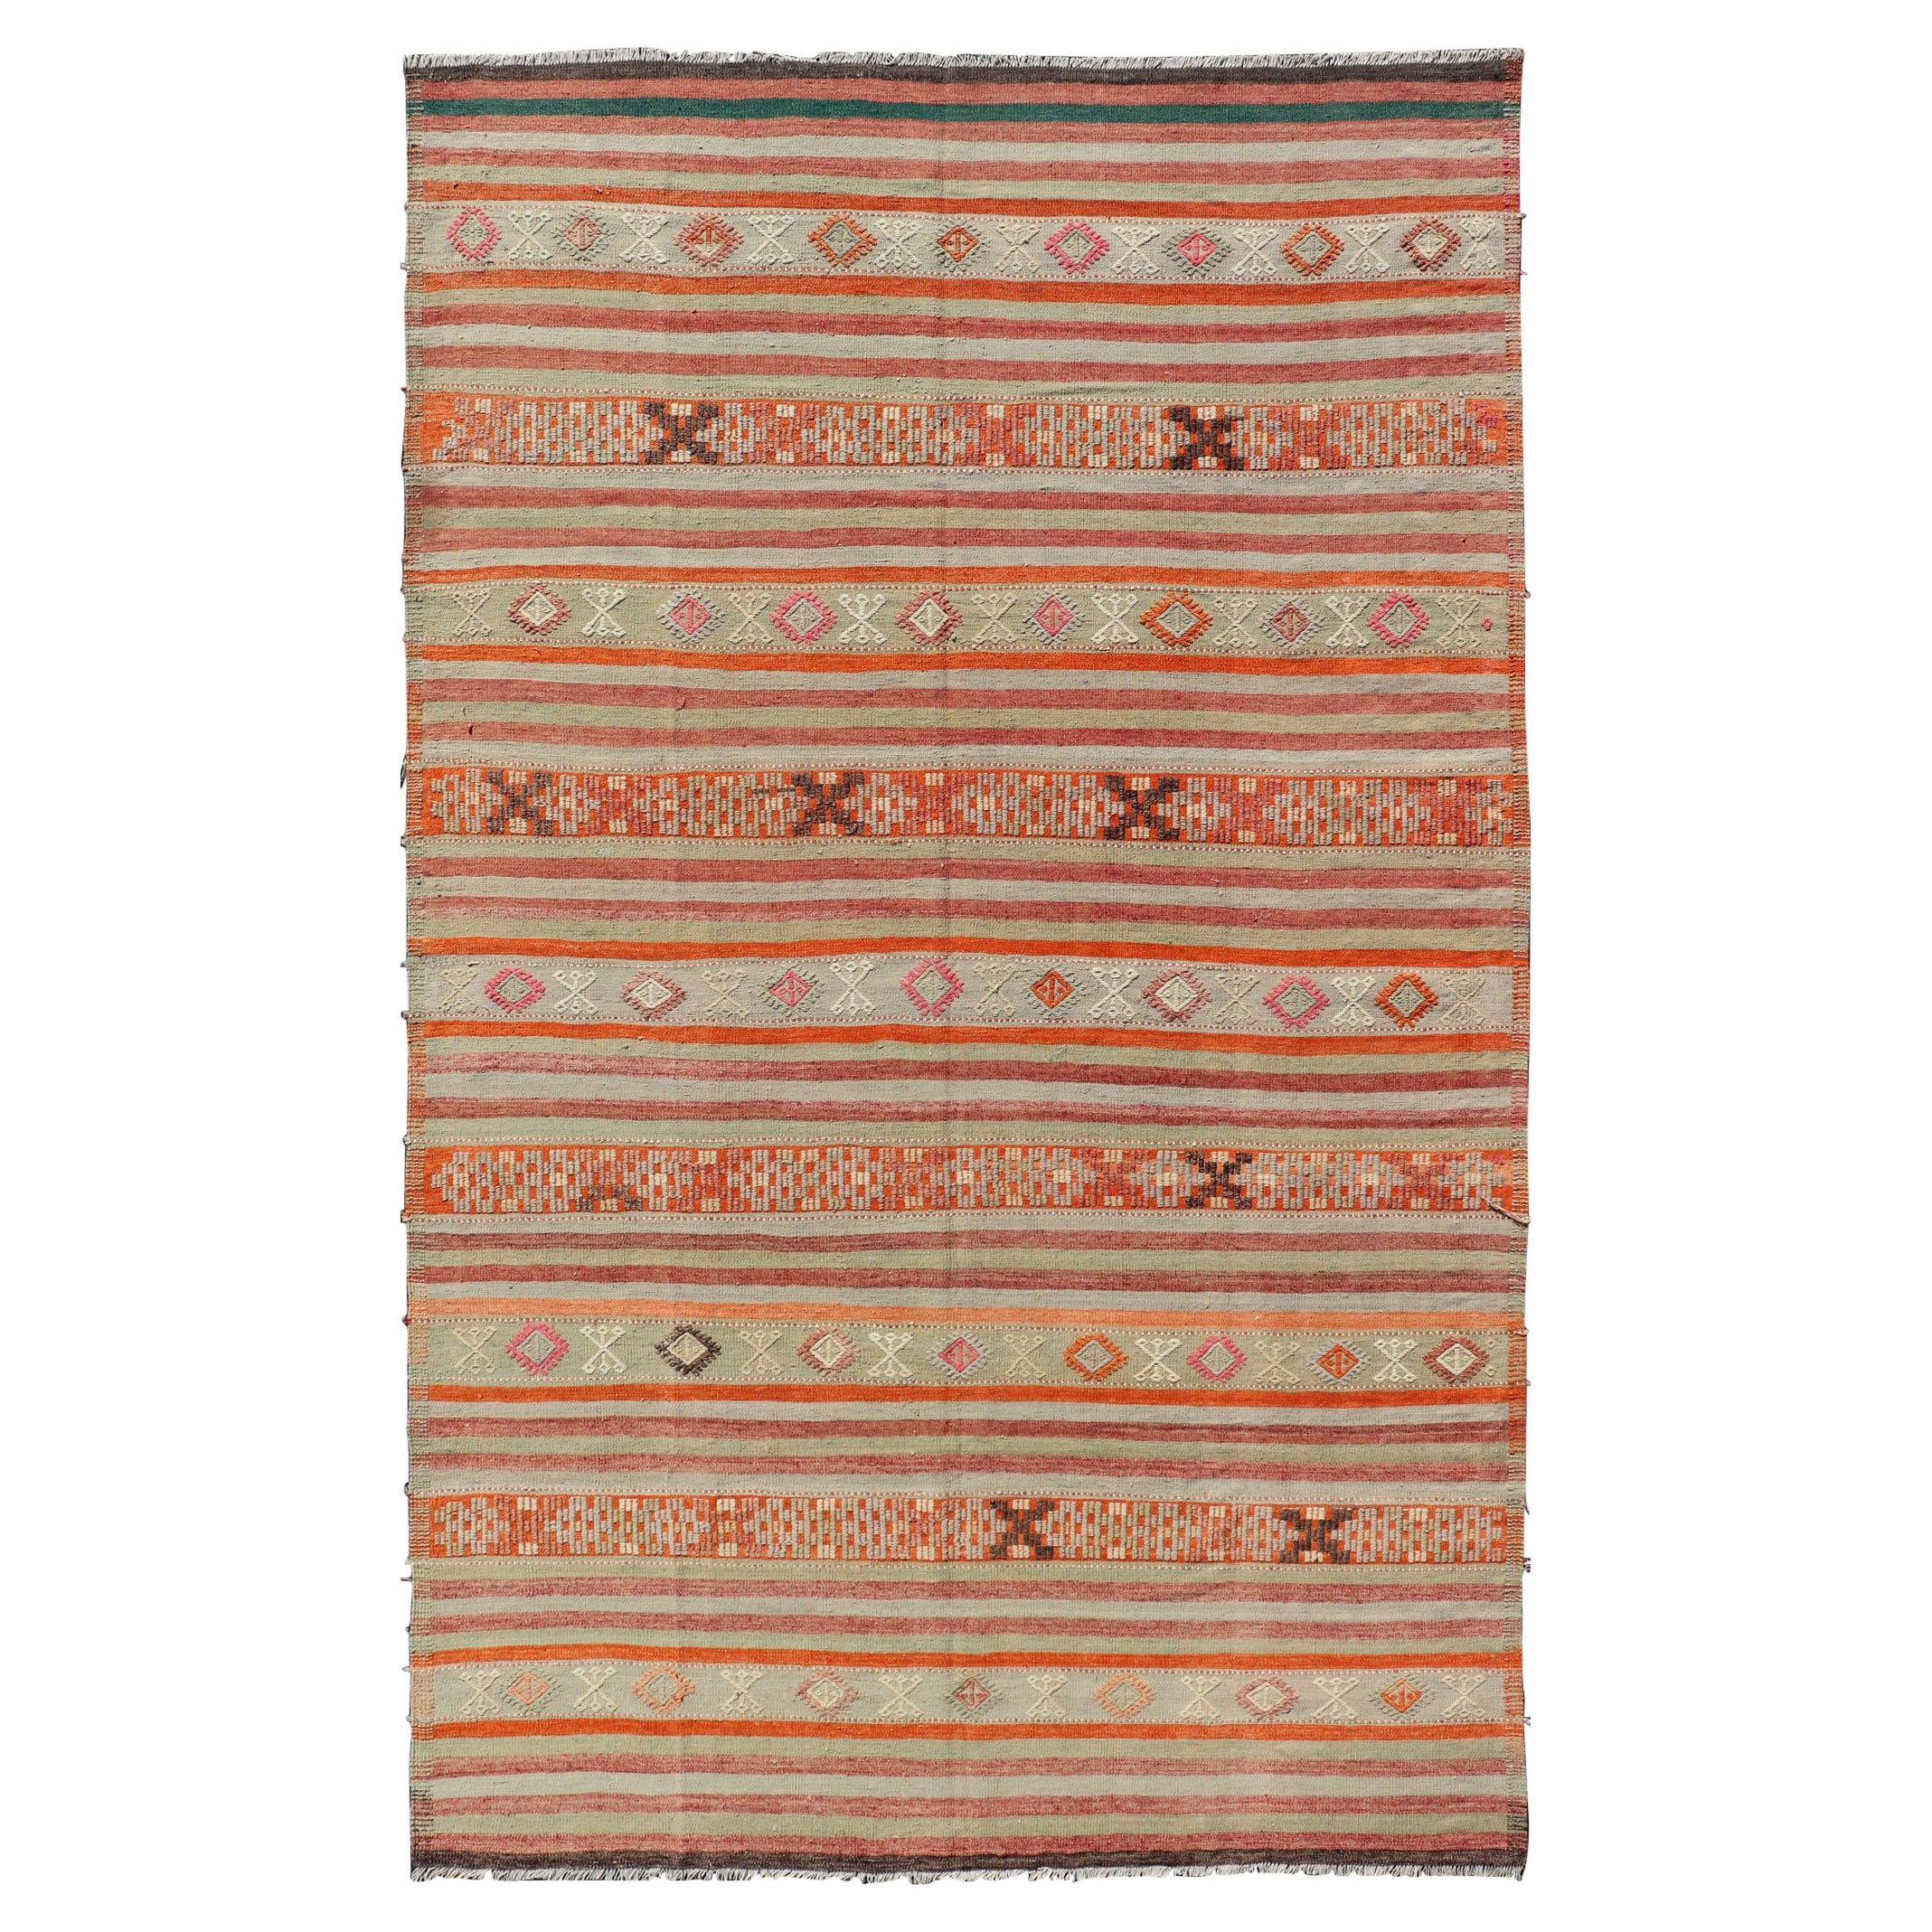 Vintage Turkish Kilim with Colorful Stripes in Orange, Lt. green, red & gray  For Sale